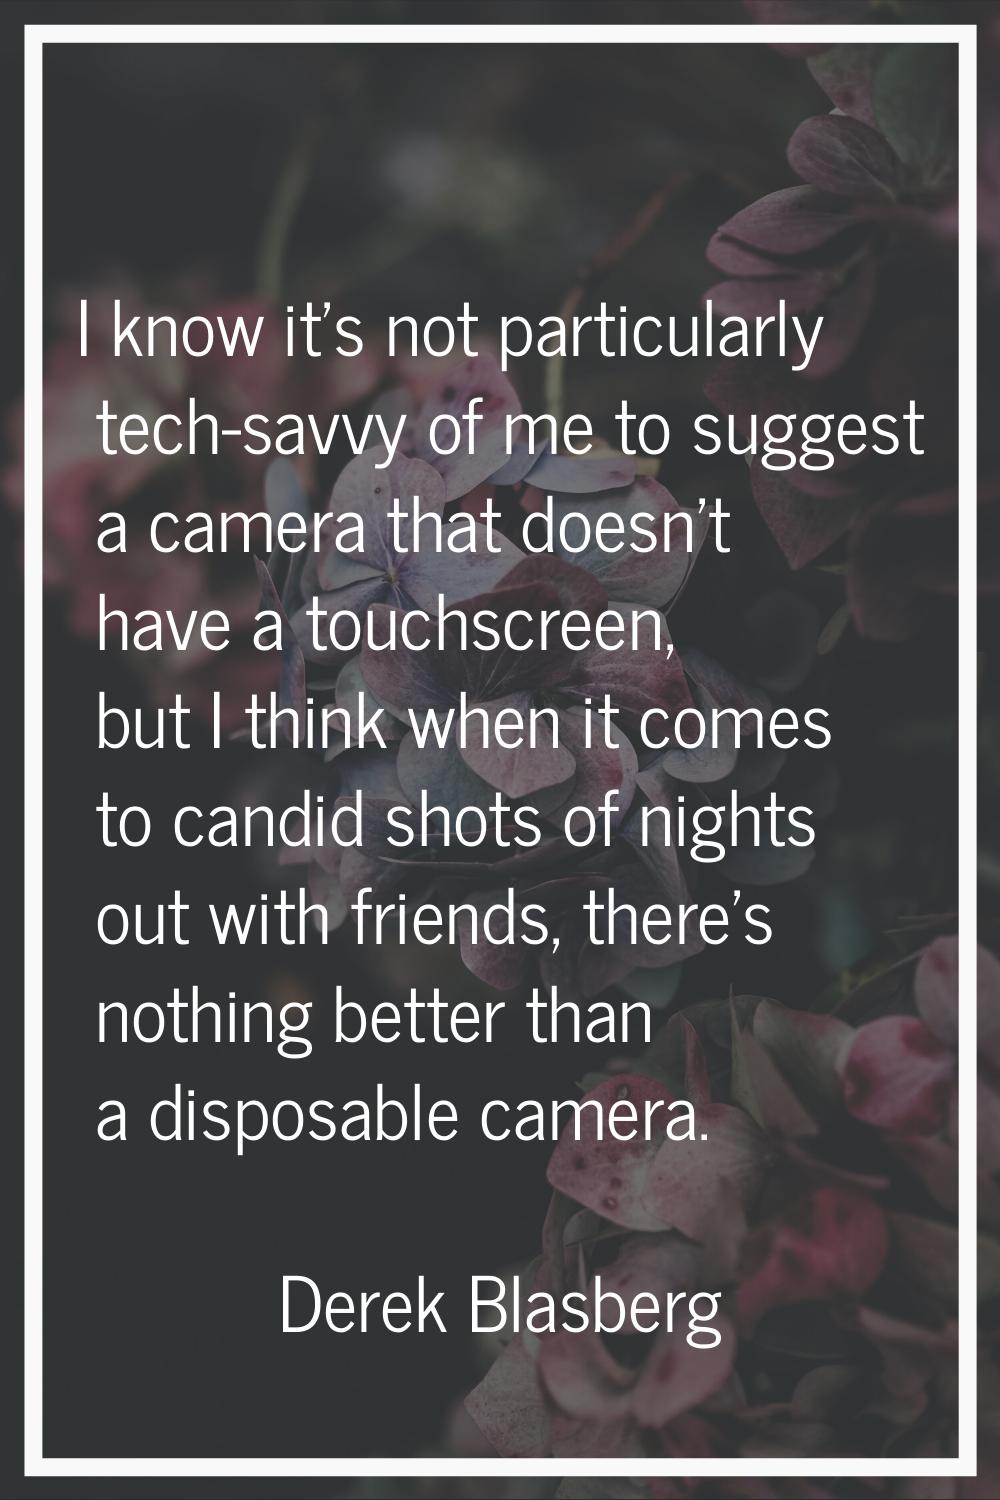 I know it's not particularly tech-savvy of me to suggest a camera that doesn't have a touchscreen, 